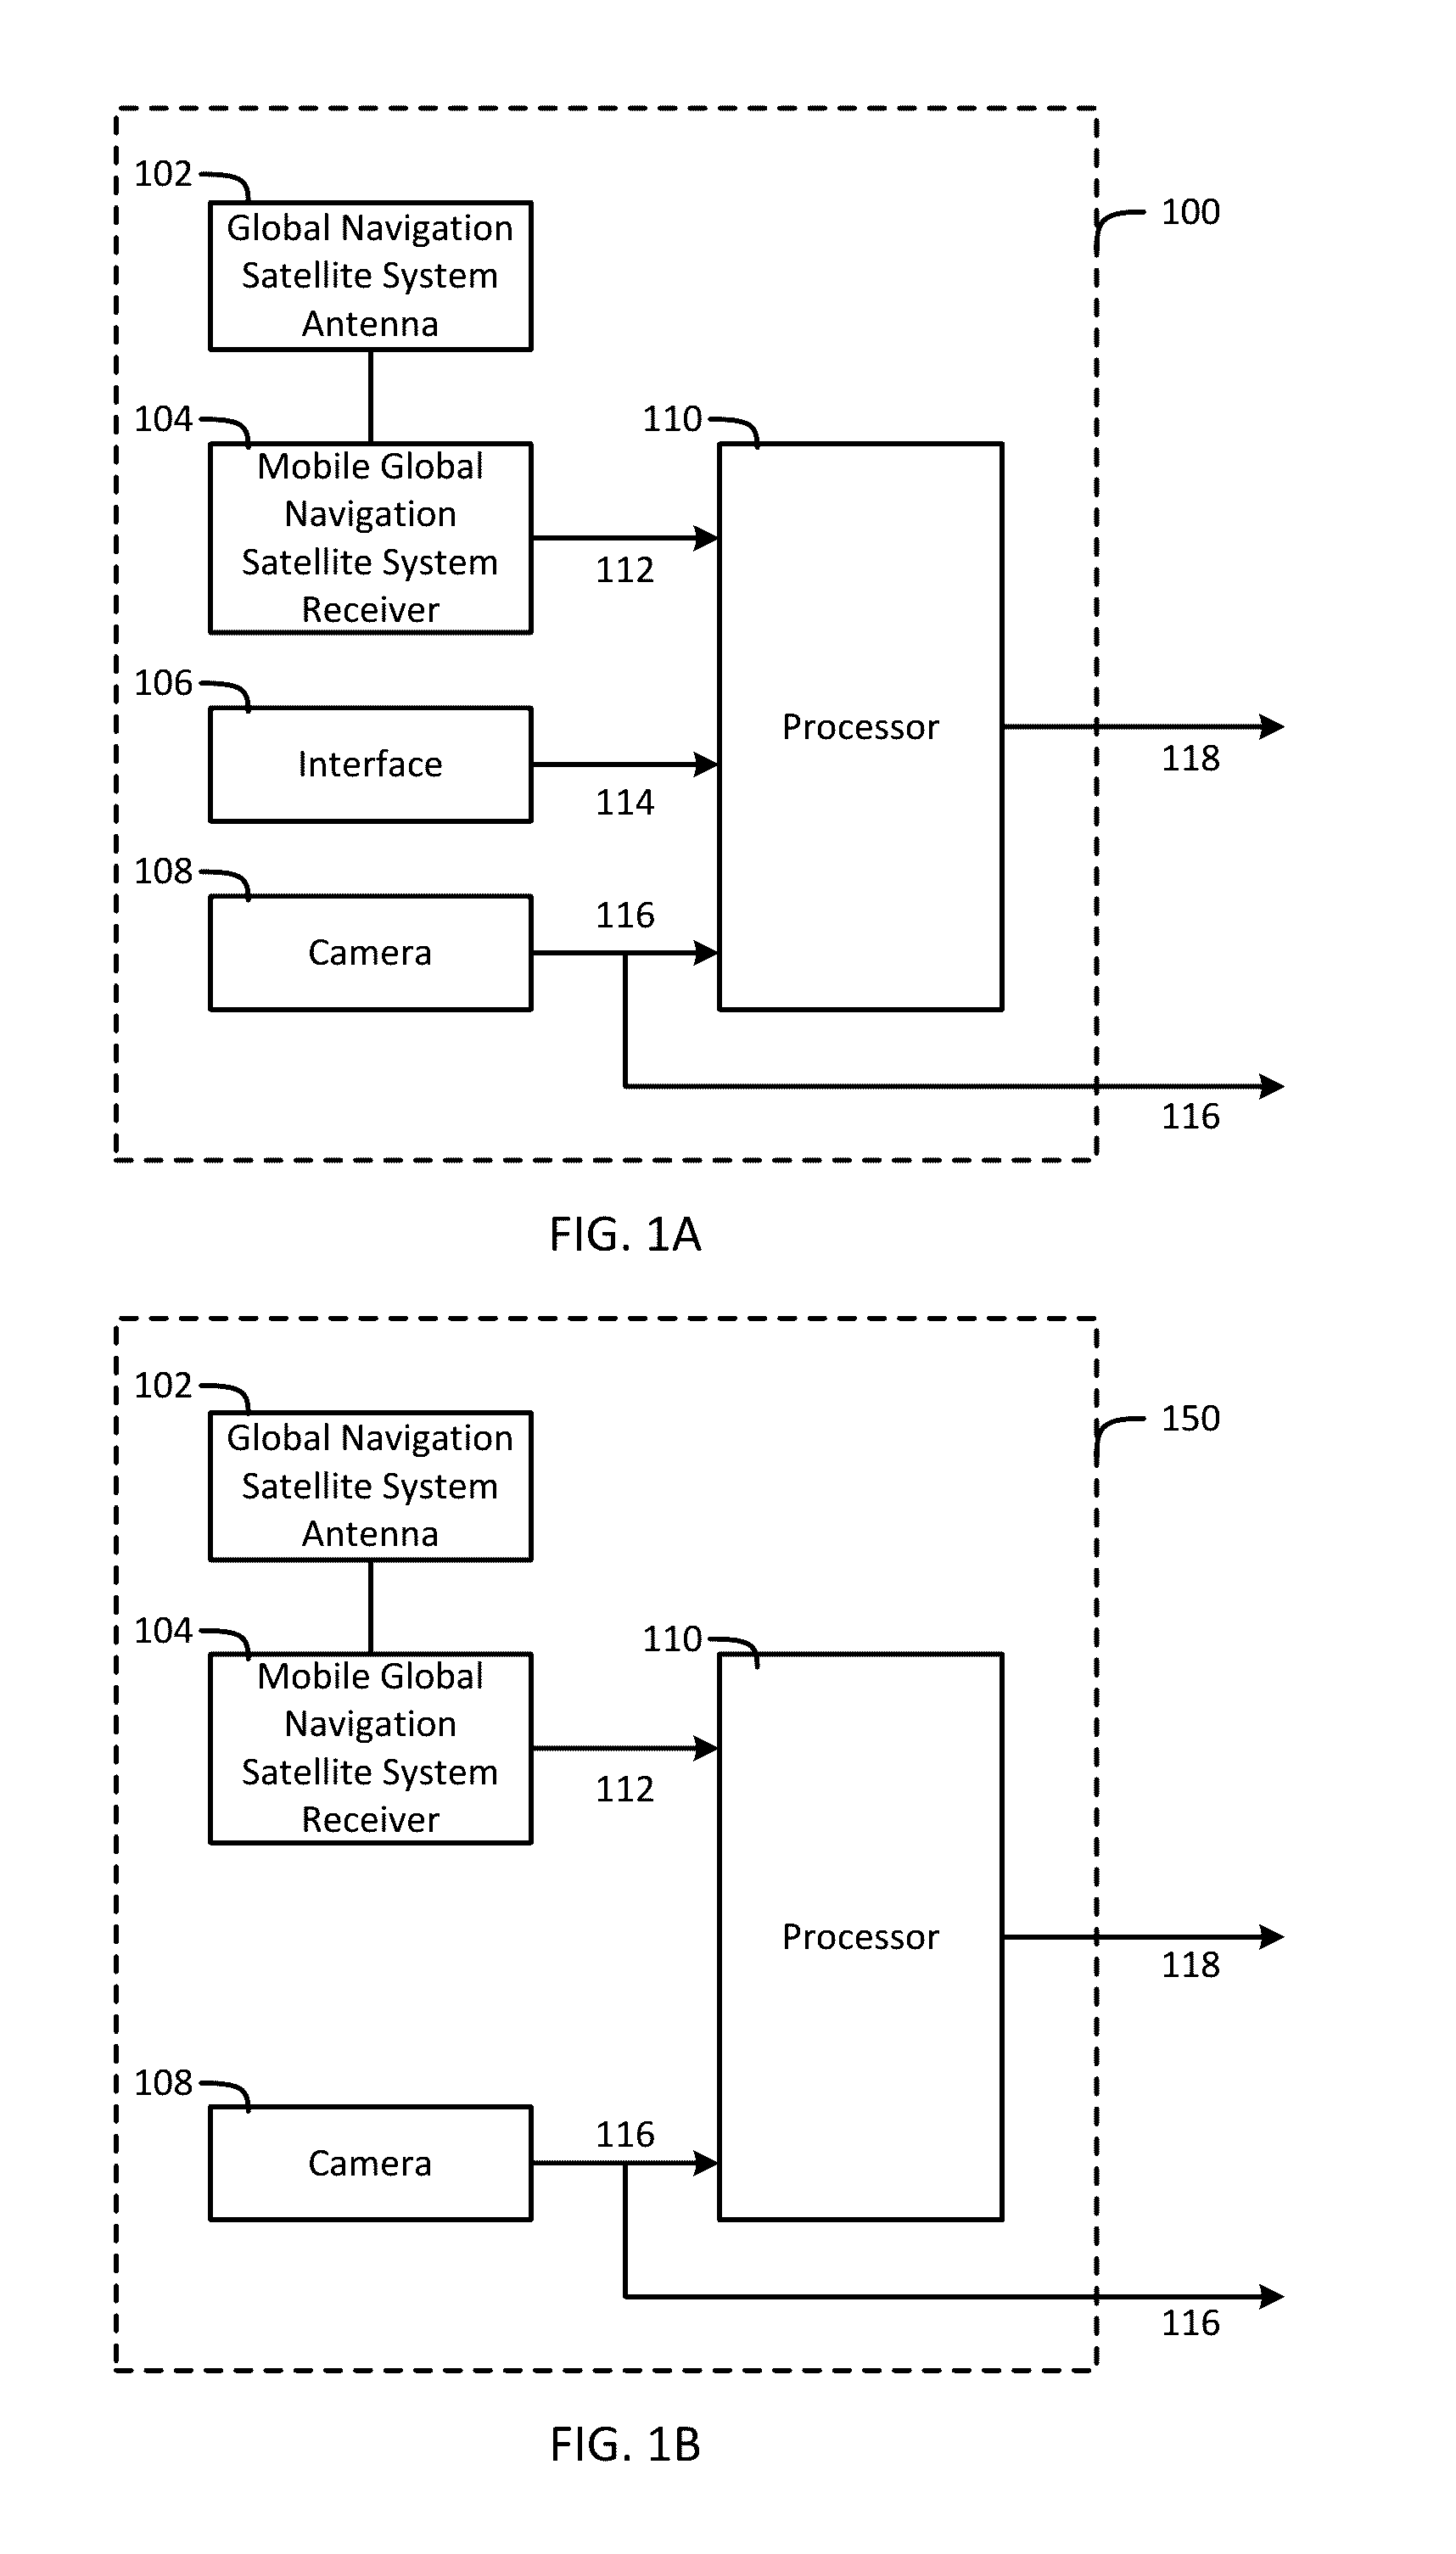 System and method for fusion of camera and global navigation satellite system (GNSS) carrier-phase measurements for globally-referenced mobile device pose determination